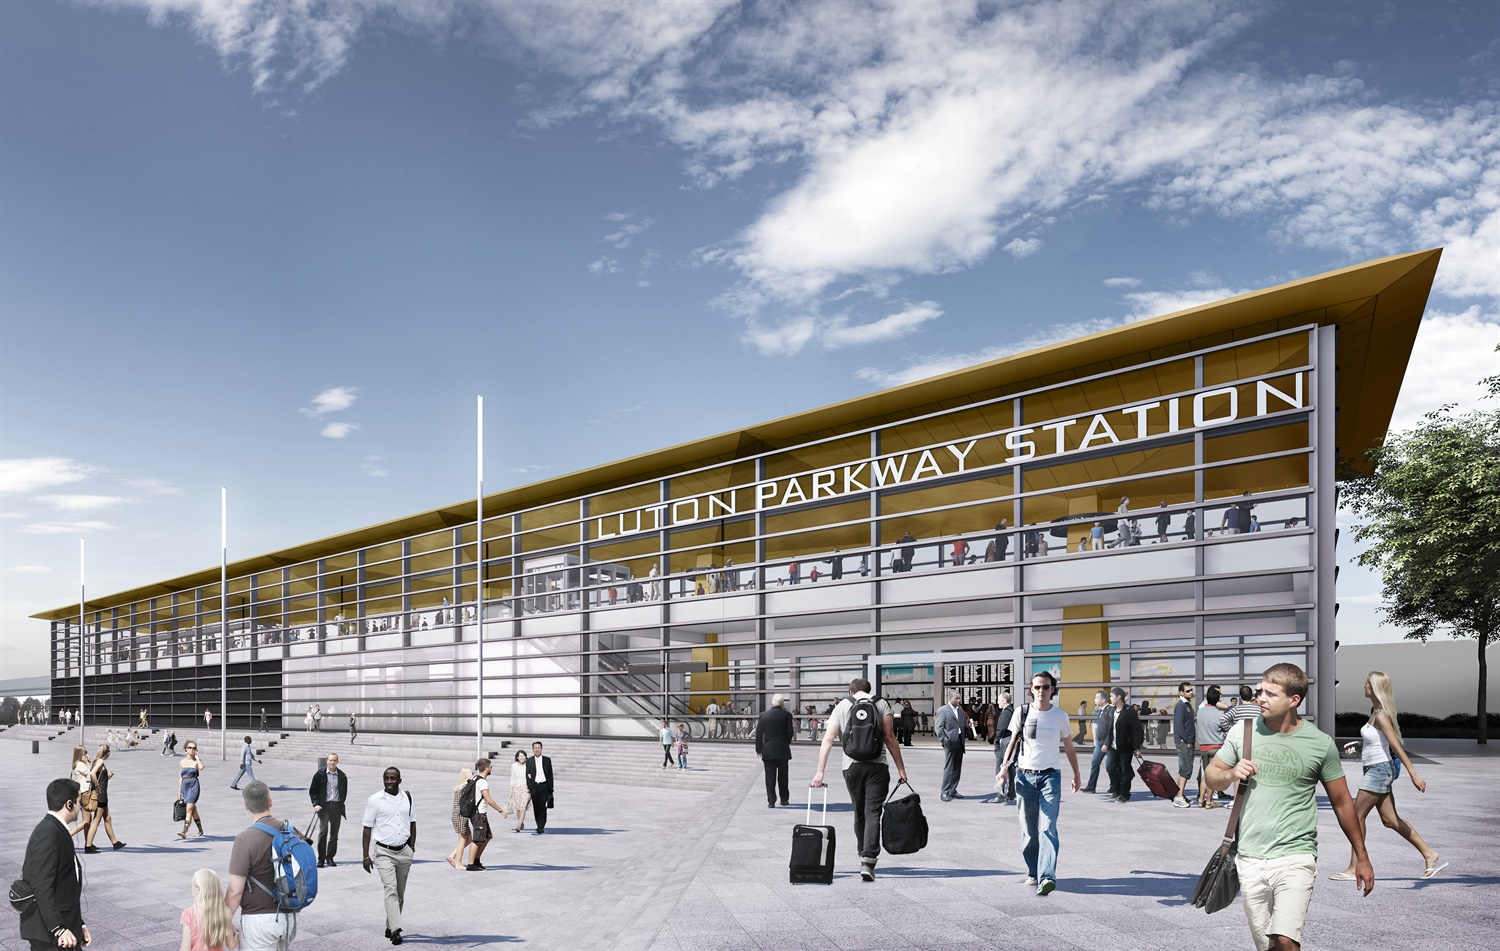 Construction begins on Luton Airport rail link